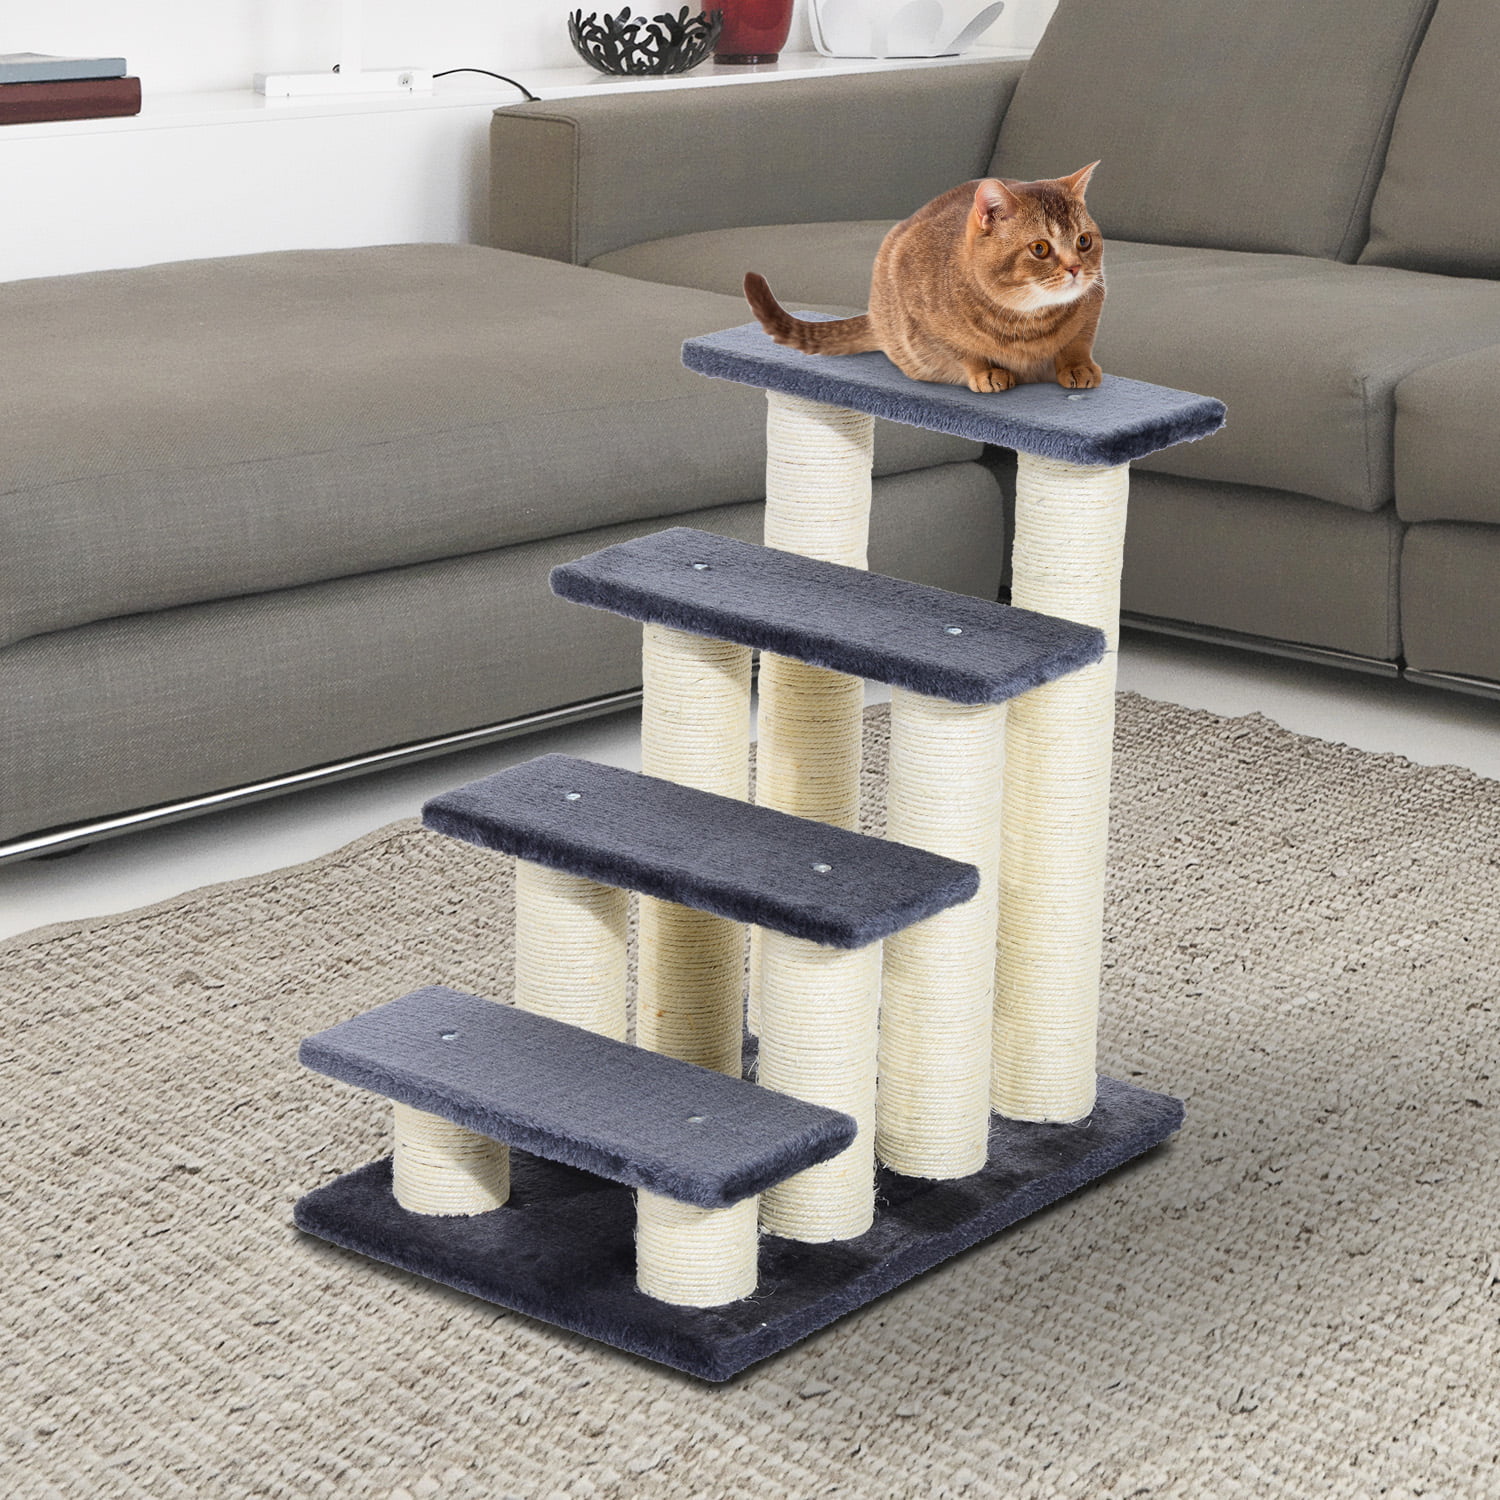 Pet tier. Pet Gear easy Step II Pet Stairs, 2 Step for Cats/Dogs up to 150 pounds.